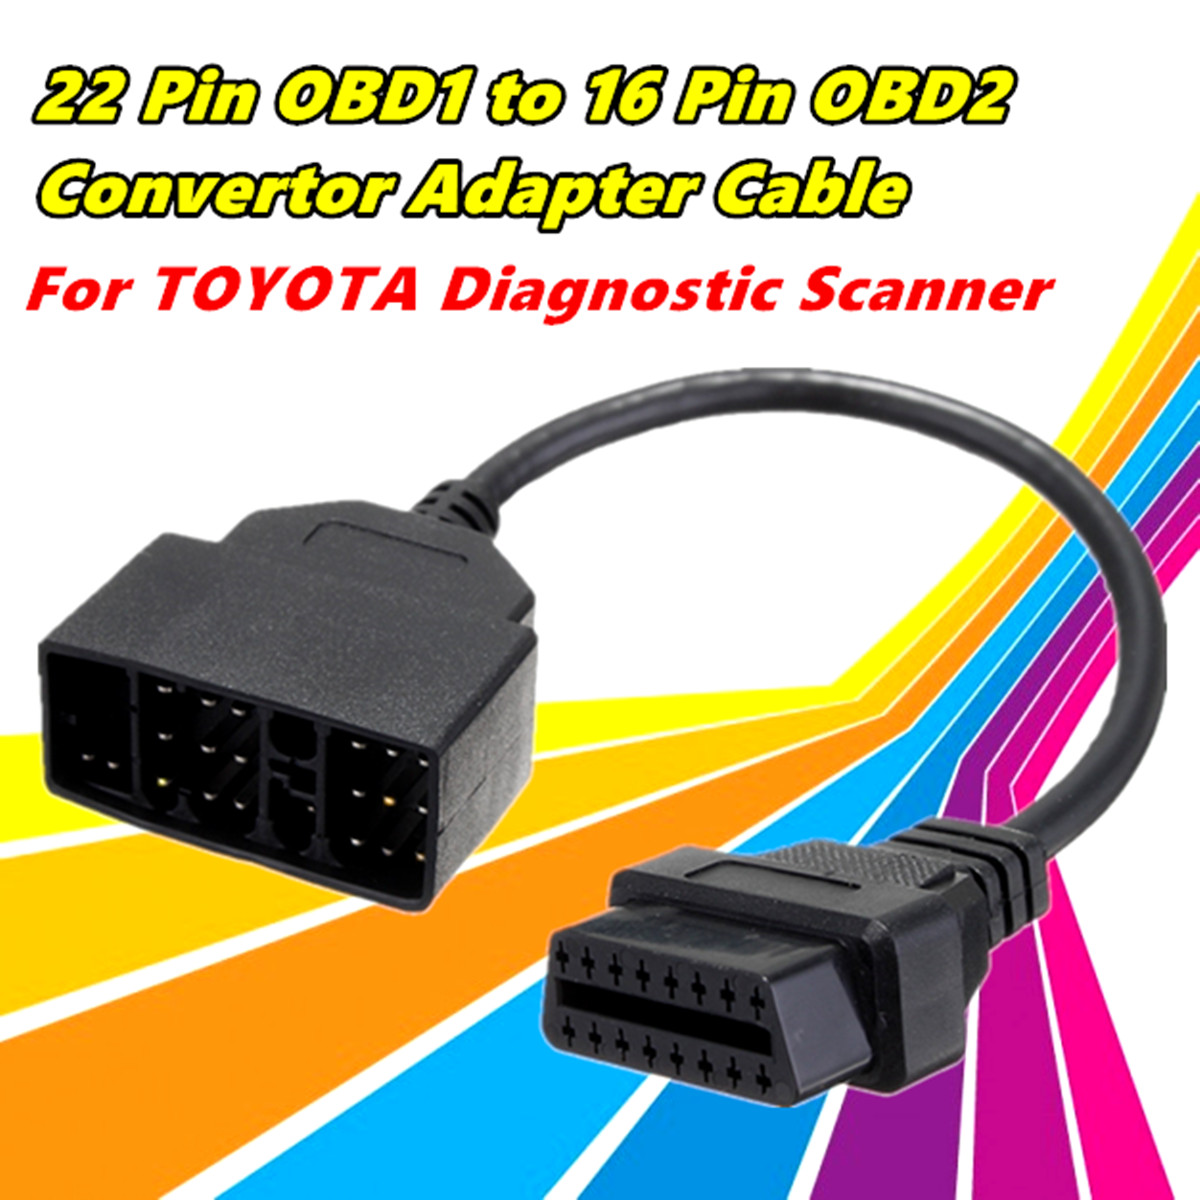 22-Pin-OBD1-to-16-Pin-OBD2-Convertor-Adapter-Cable-for-TOYOTA-Diagnostic-Scanner-1369958